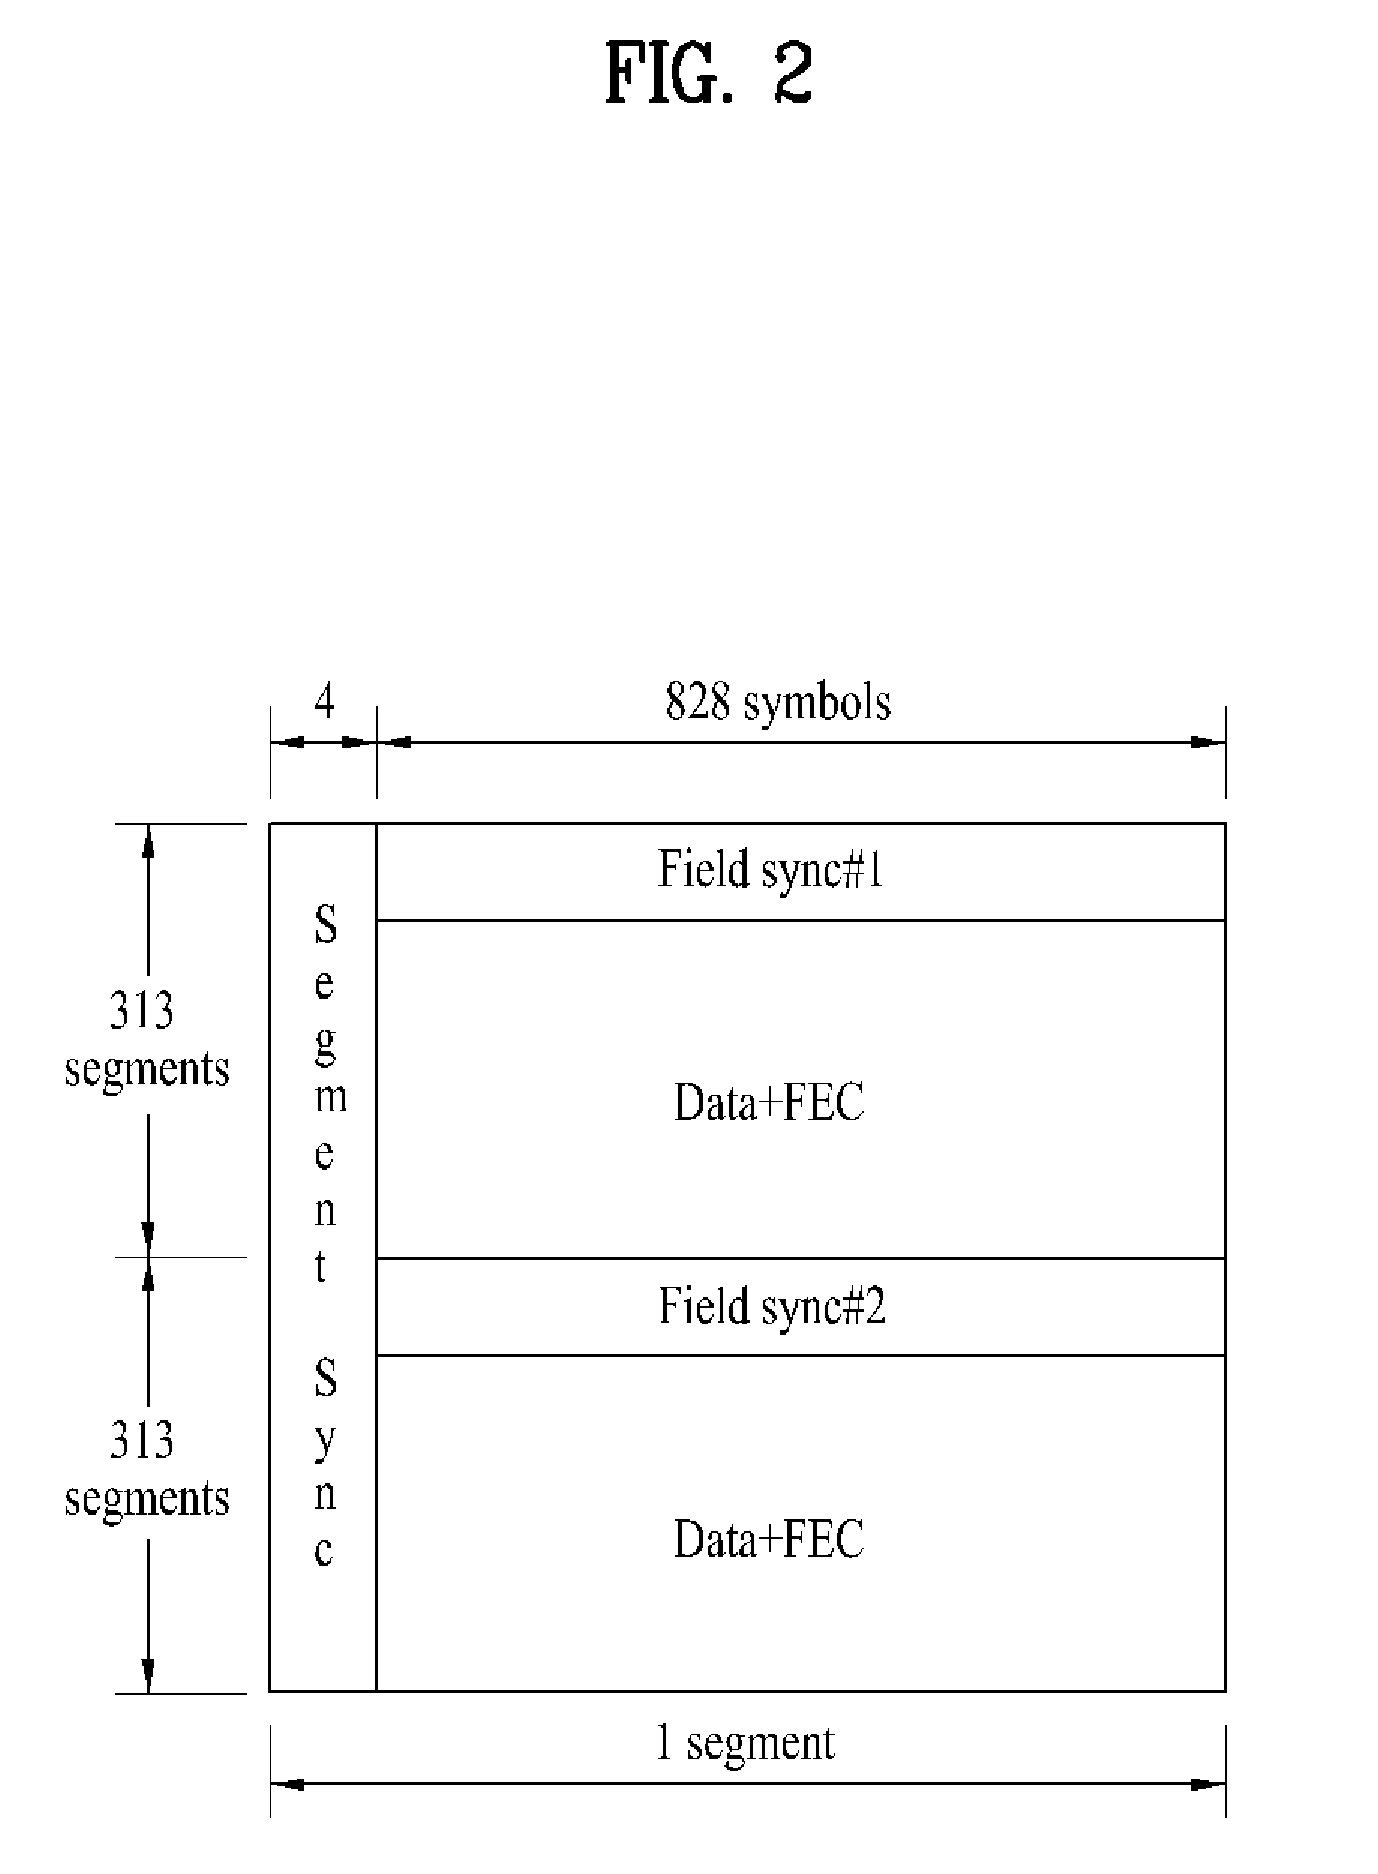 Transmitting/receiving system and method of processing broadcast signal in transmitting/receiving system